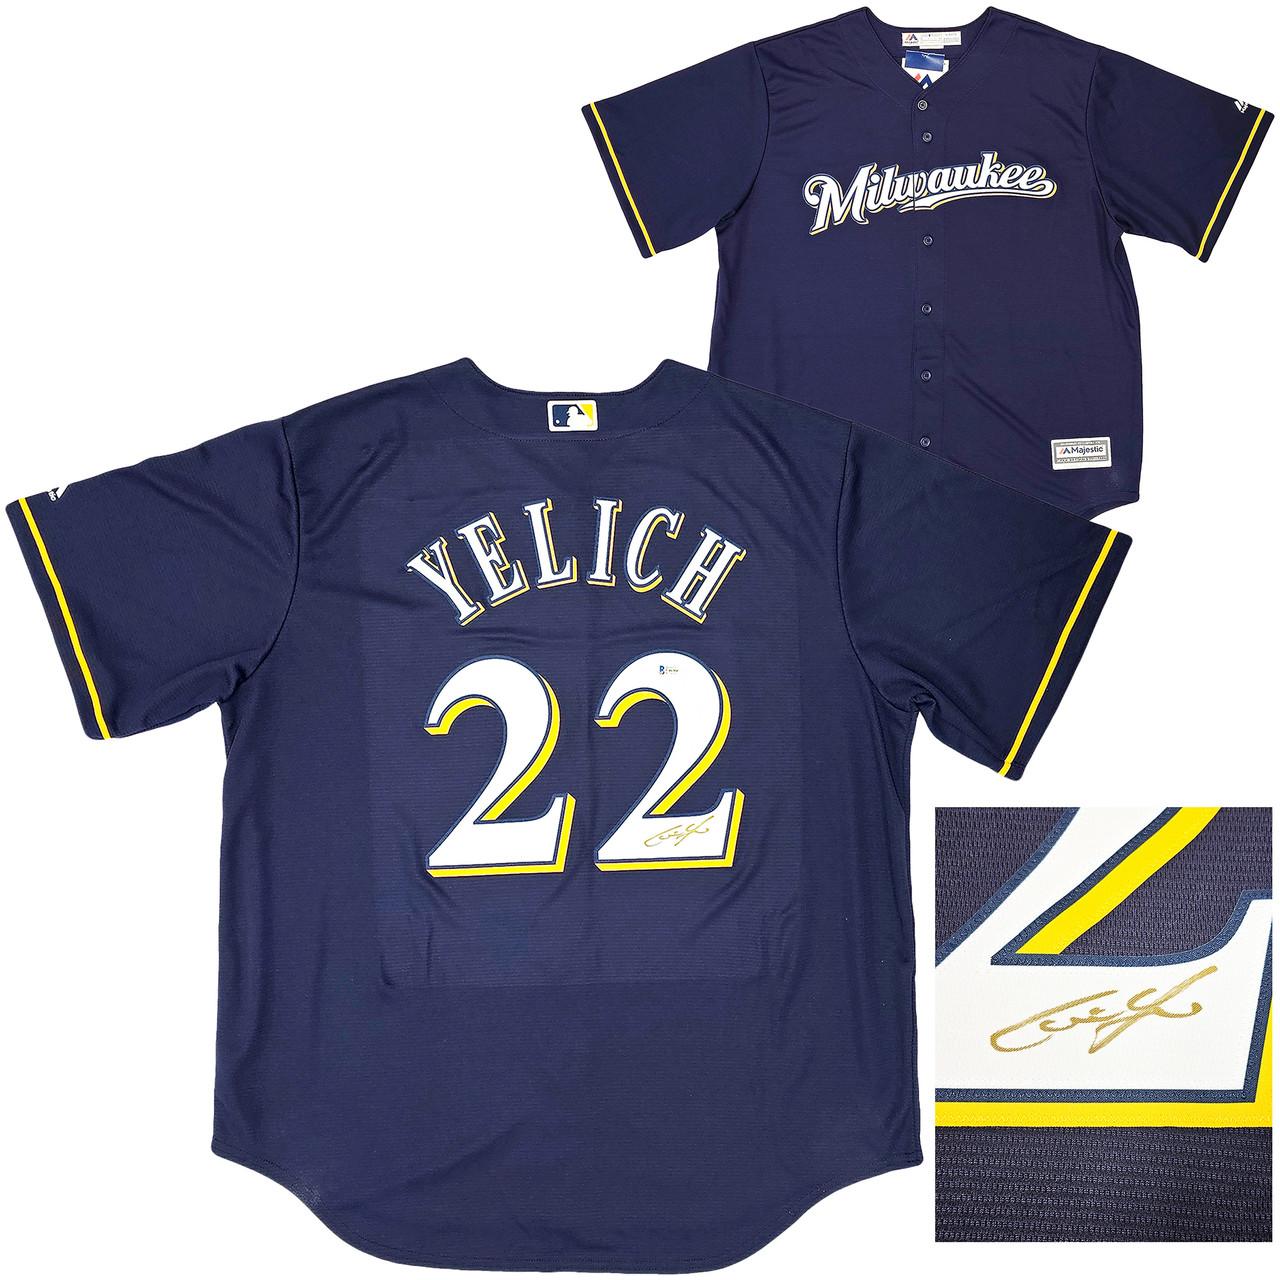 Framed Christian Yelich Milwaukee Brewers Autographed White Nike Replica  Jersey